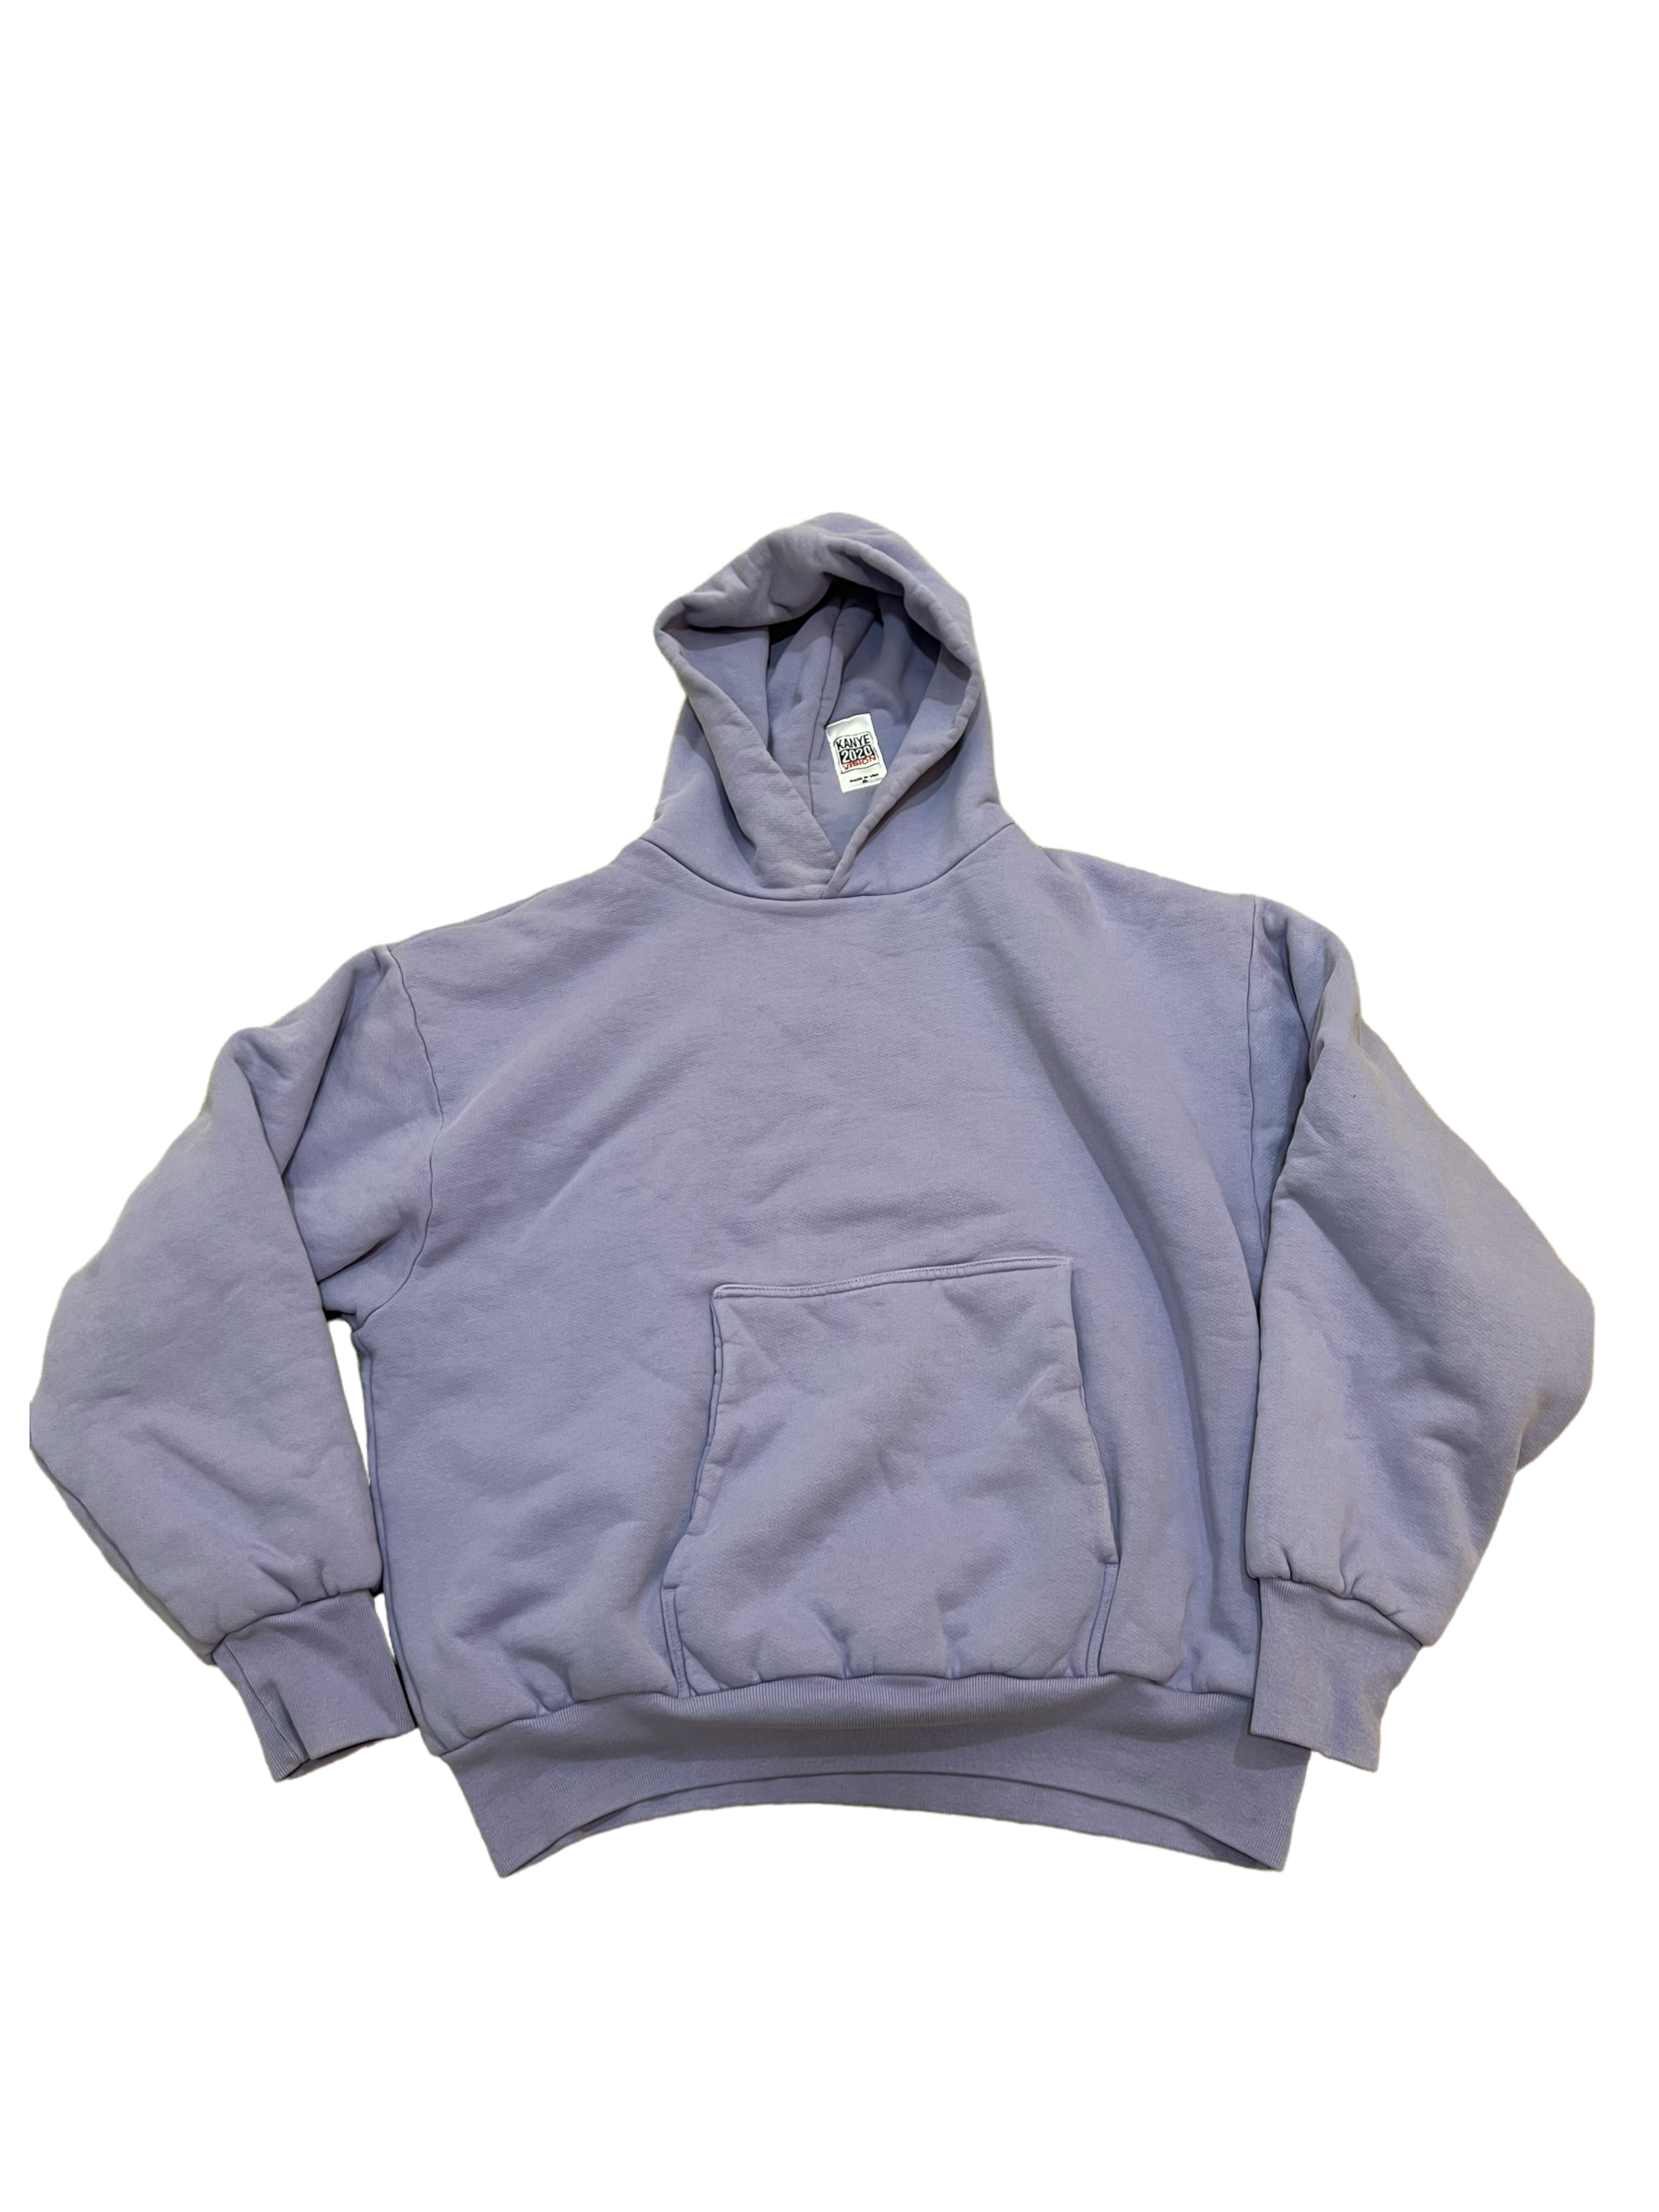 YZY 2020 Vision Double layered Hoodie – VlordsWorld